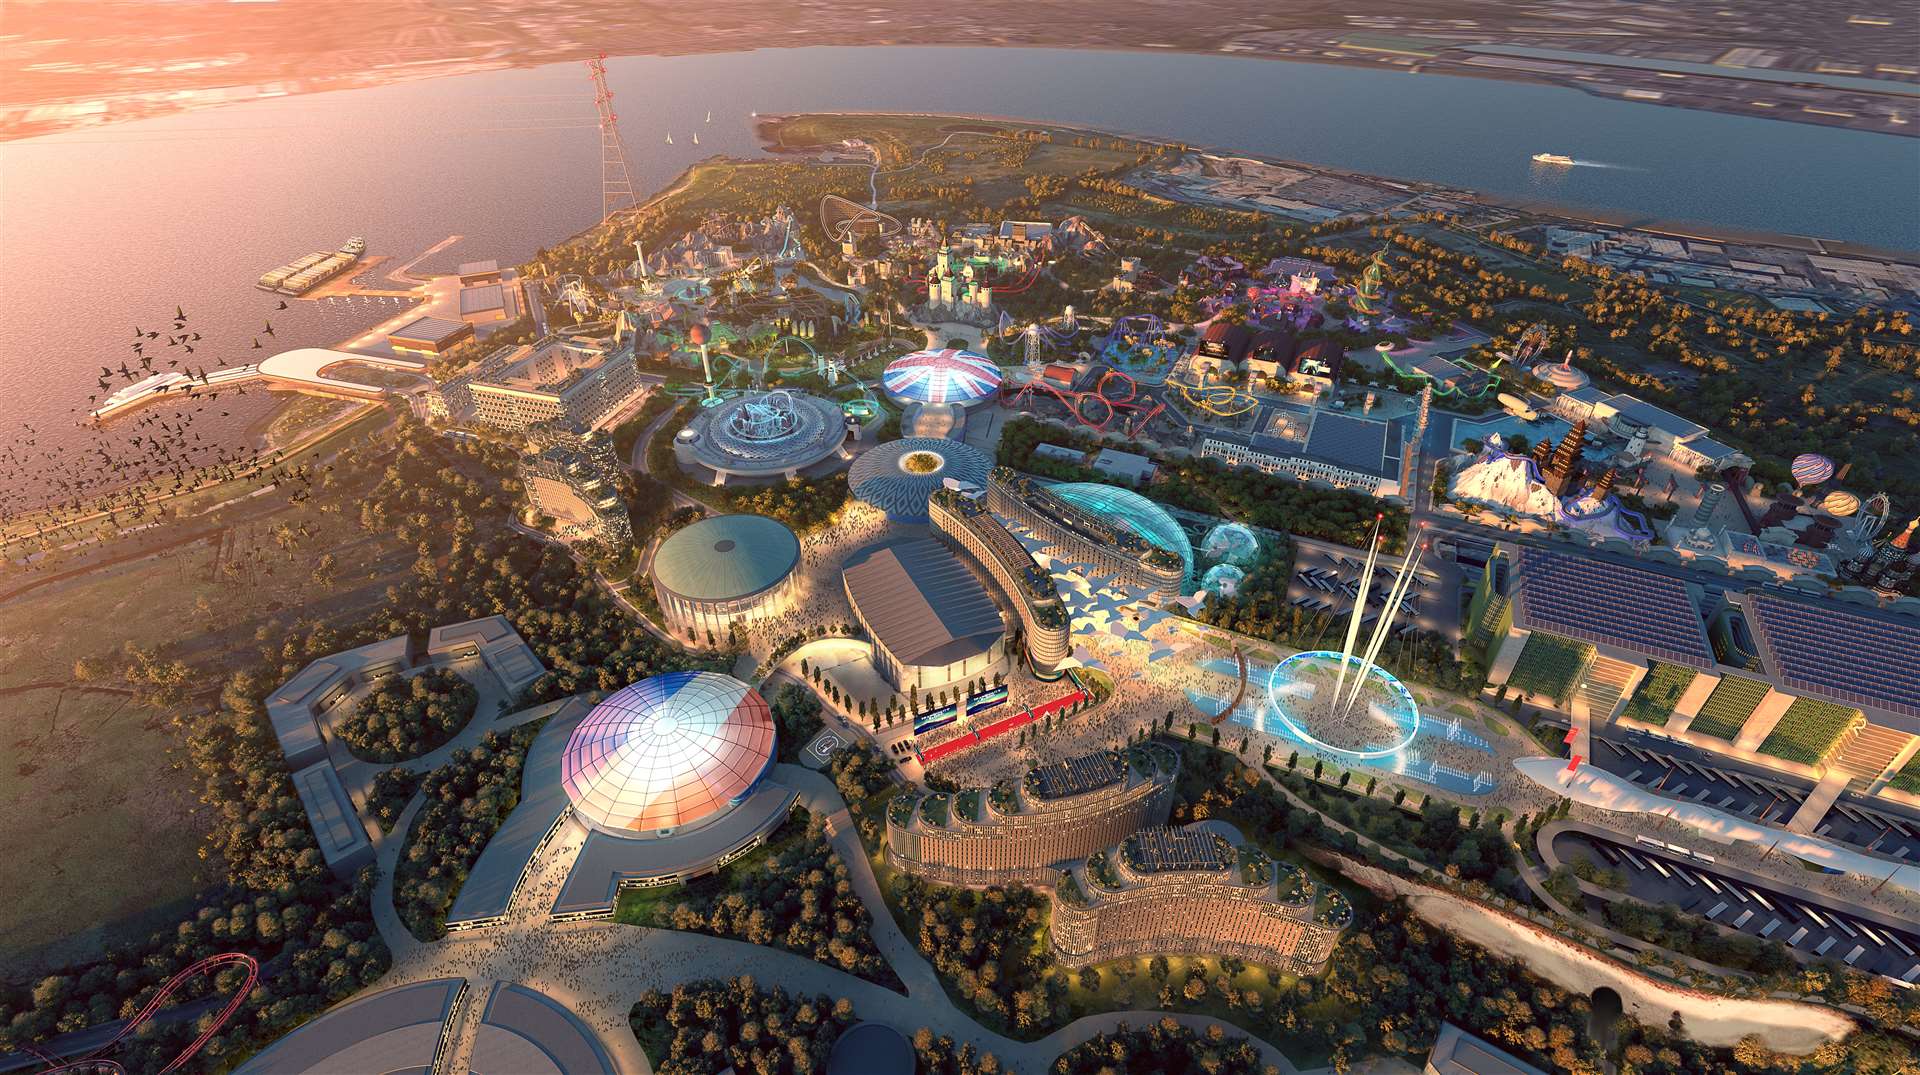 A new detailed impression of what the London Resort theme park will look like